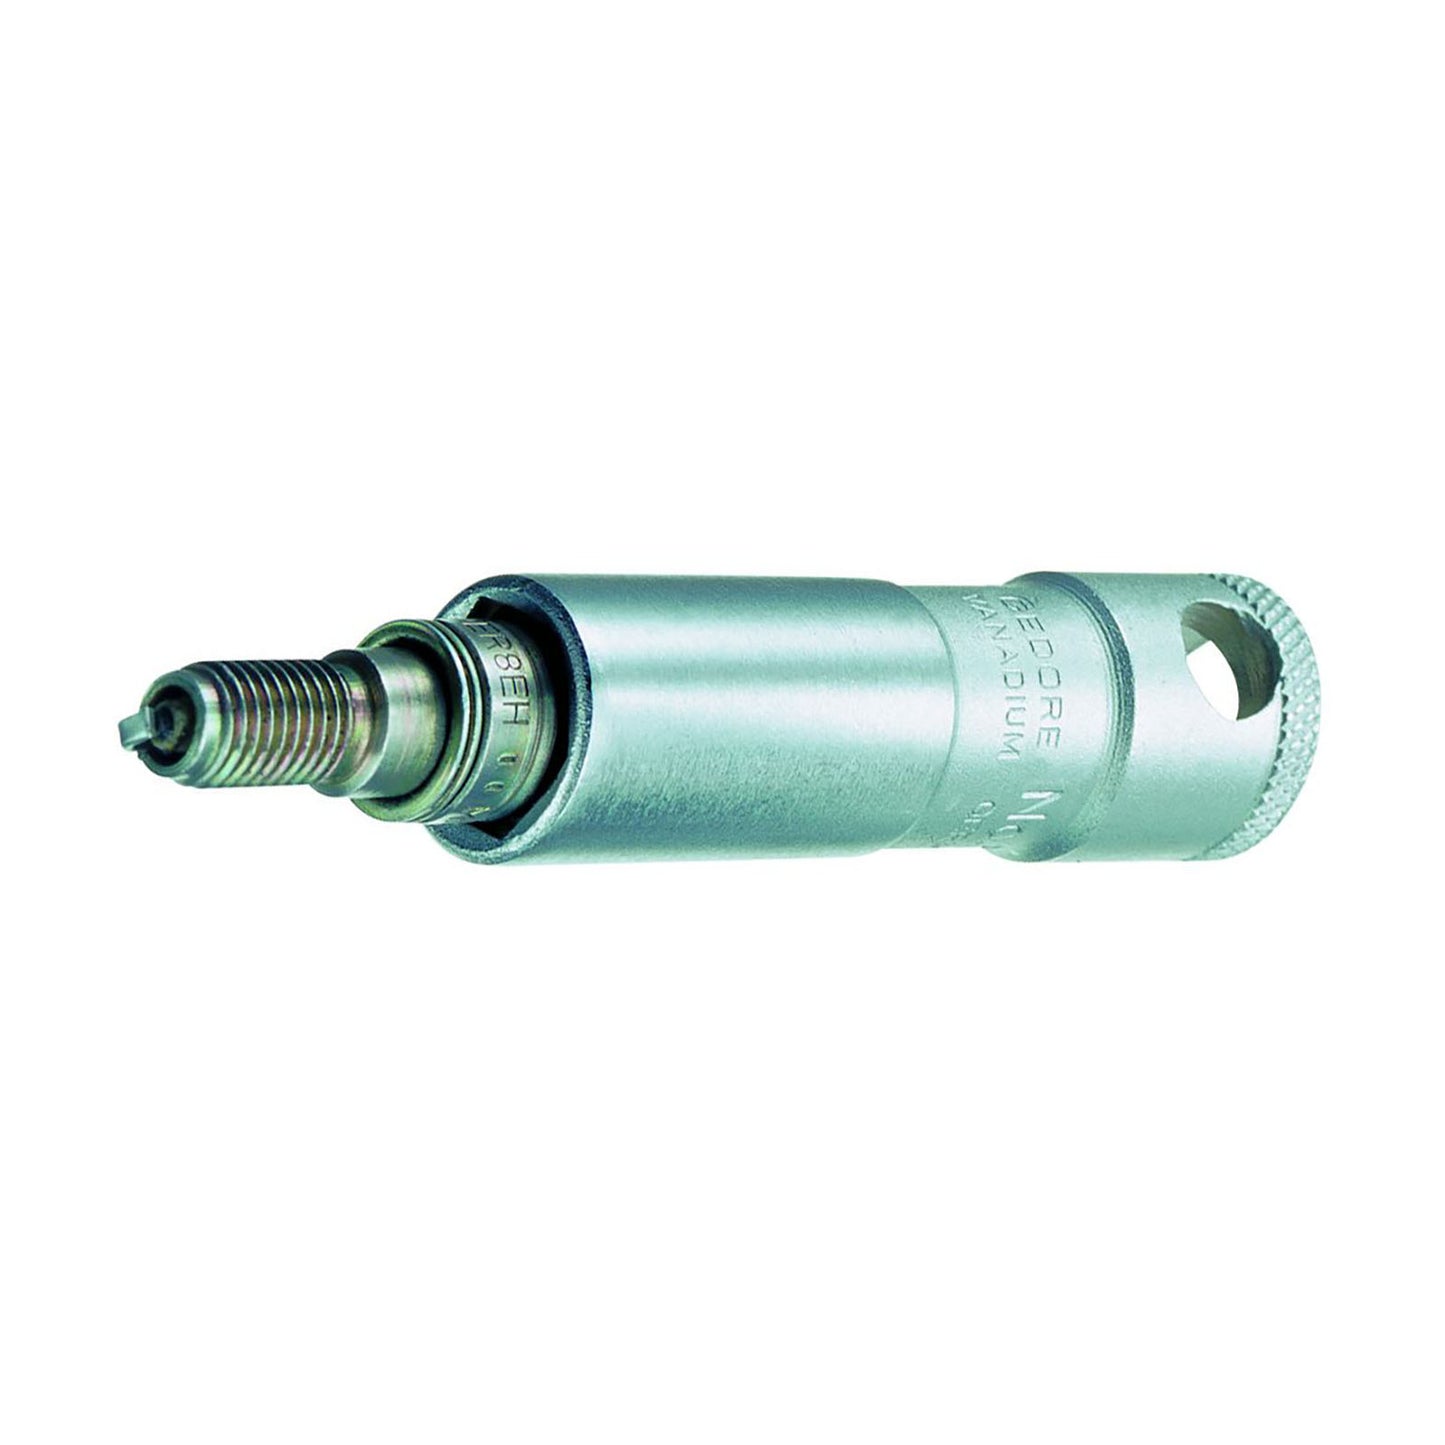 GEDORE 54 MH - Spark Plug Socket with Magnet (6363470)